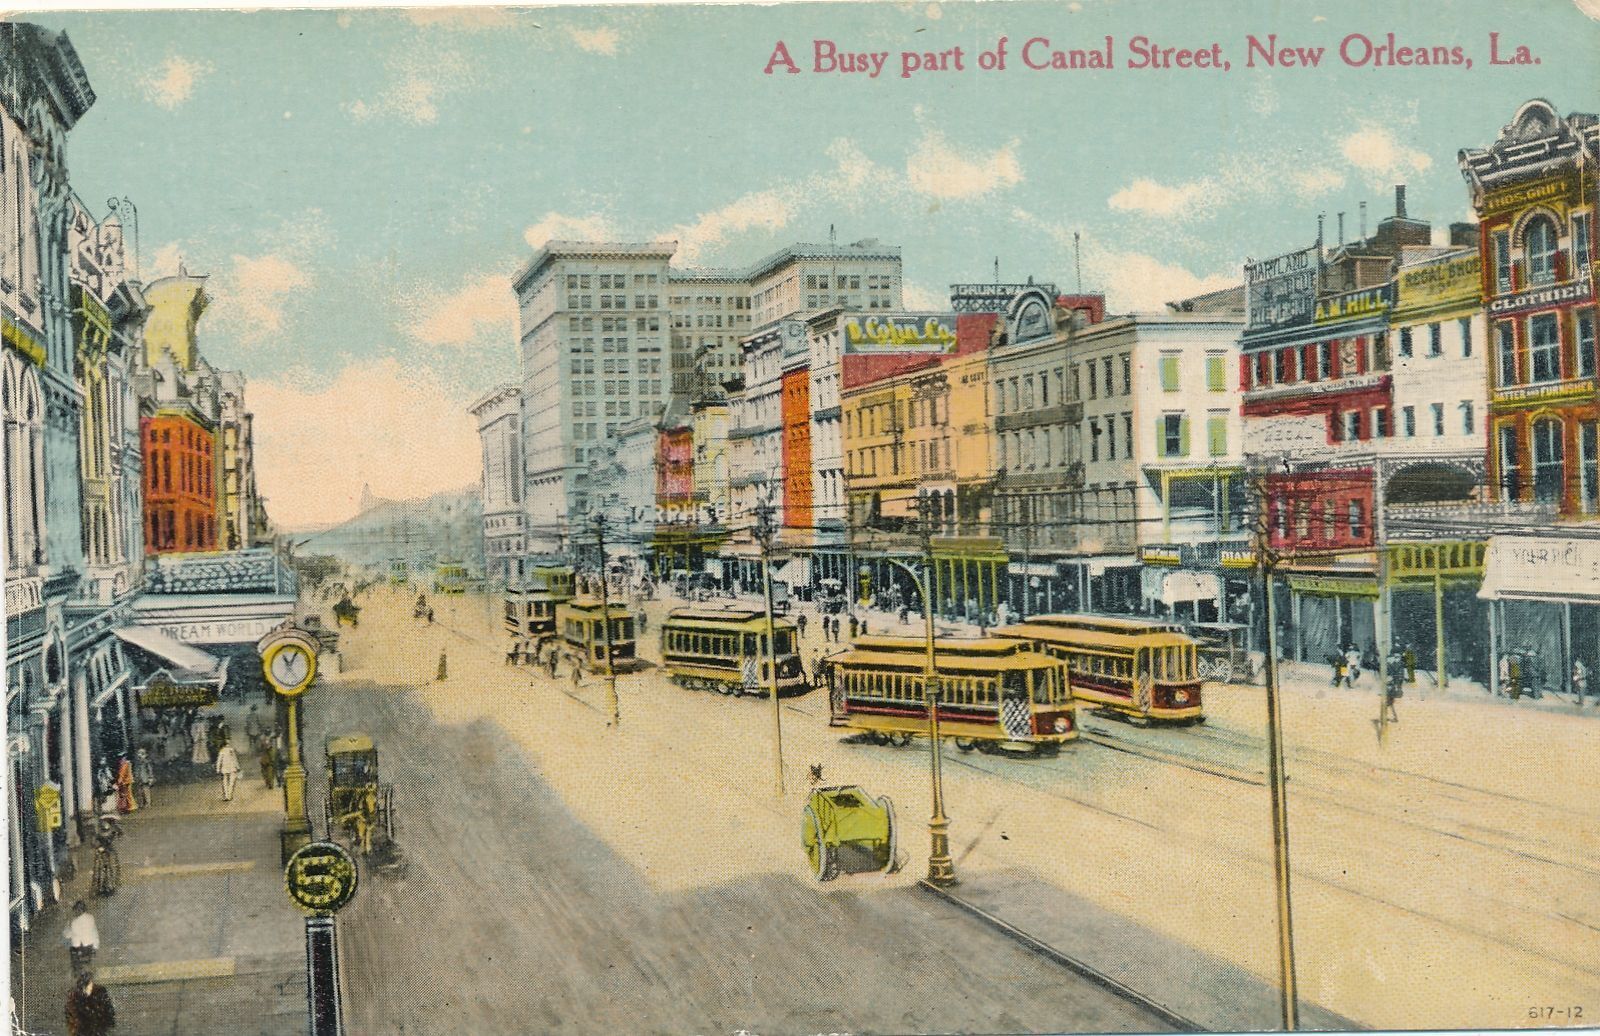 NEW ORLEANS LA - A Busy Part Of Canal Street Postcard